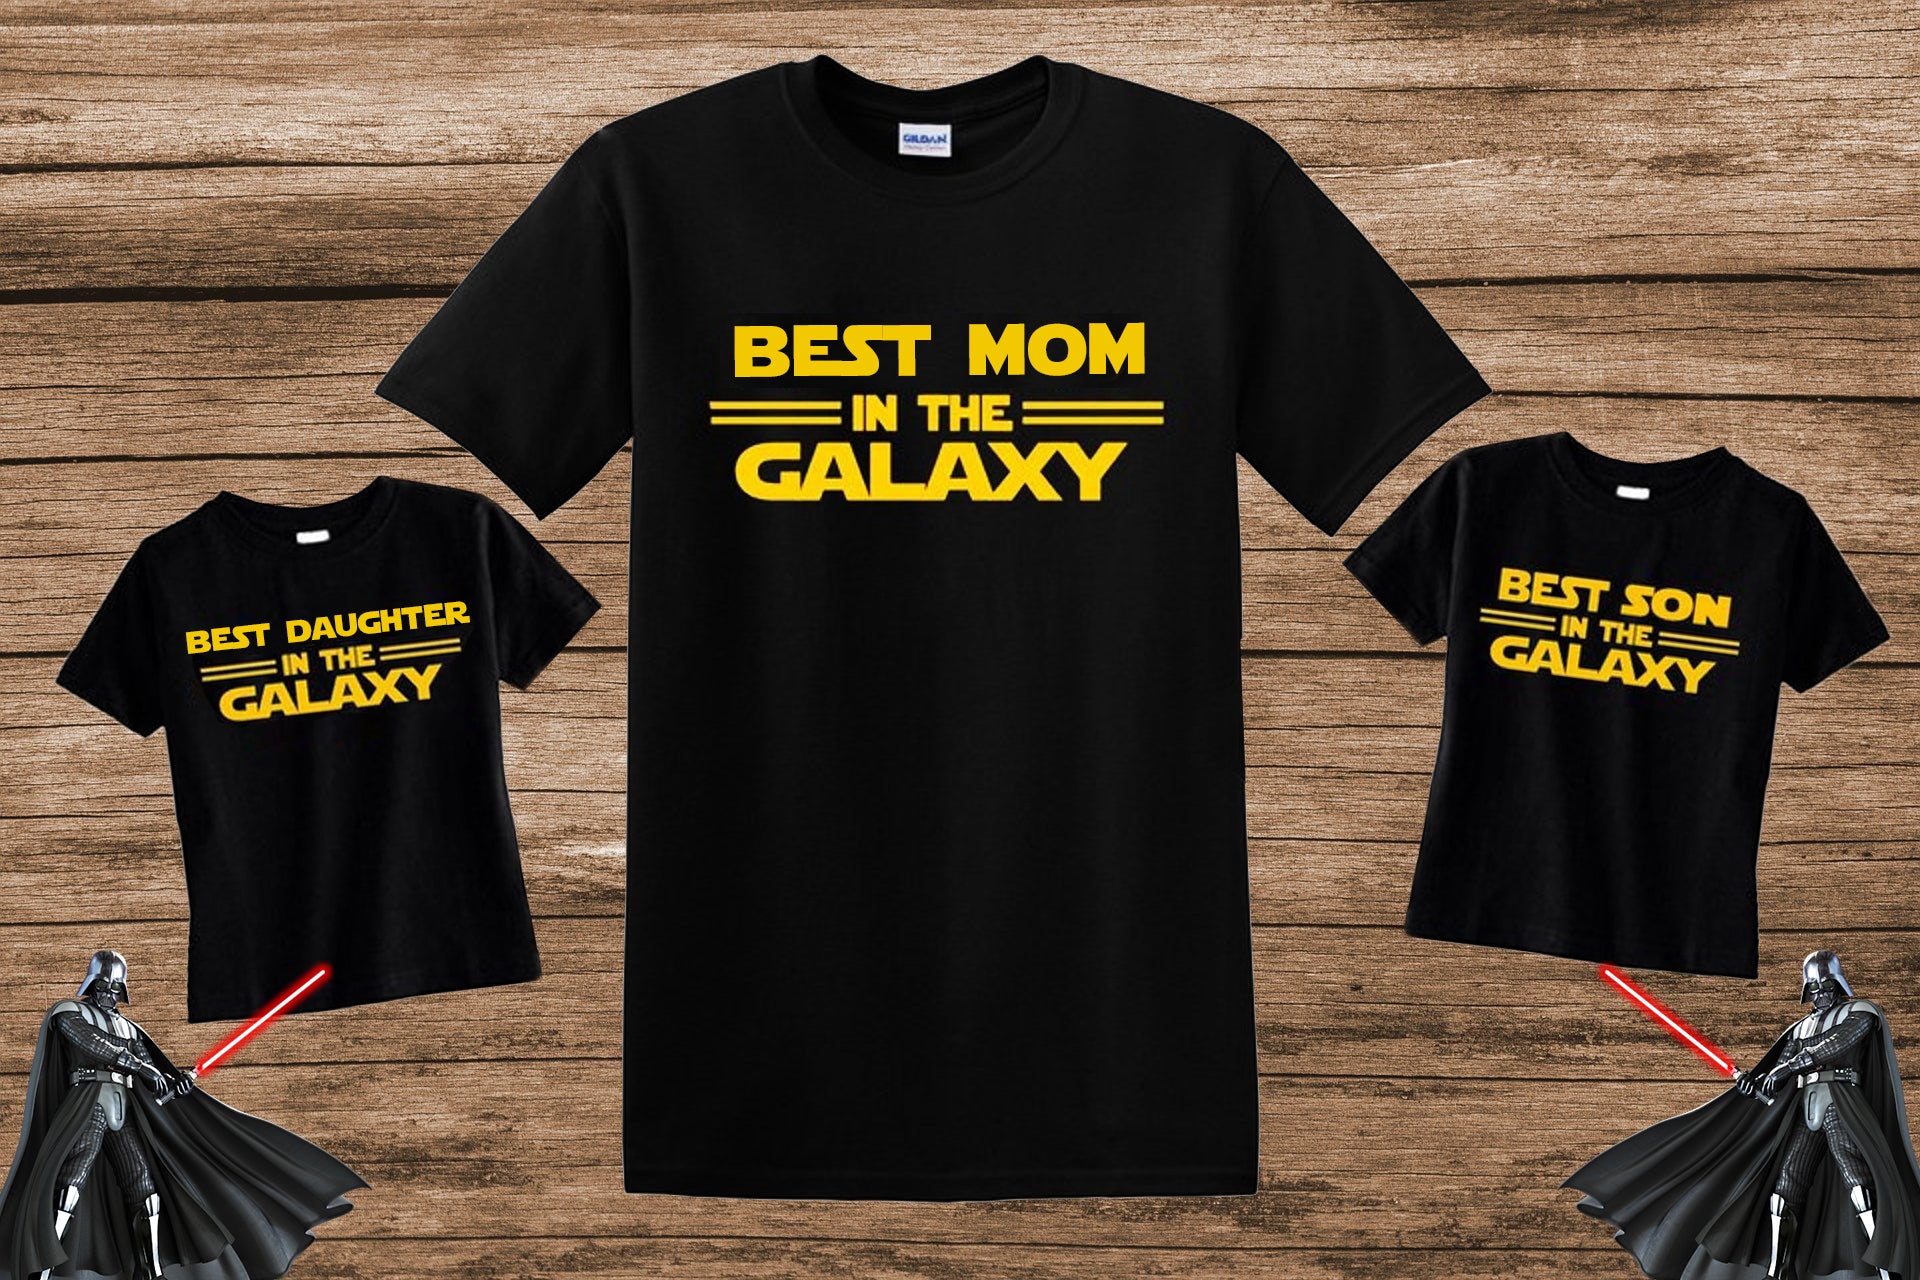 45 Best Star Wars Gift Ideas for True Fans! (For Mom, Dad, and Kids) -  Abbotts At Home